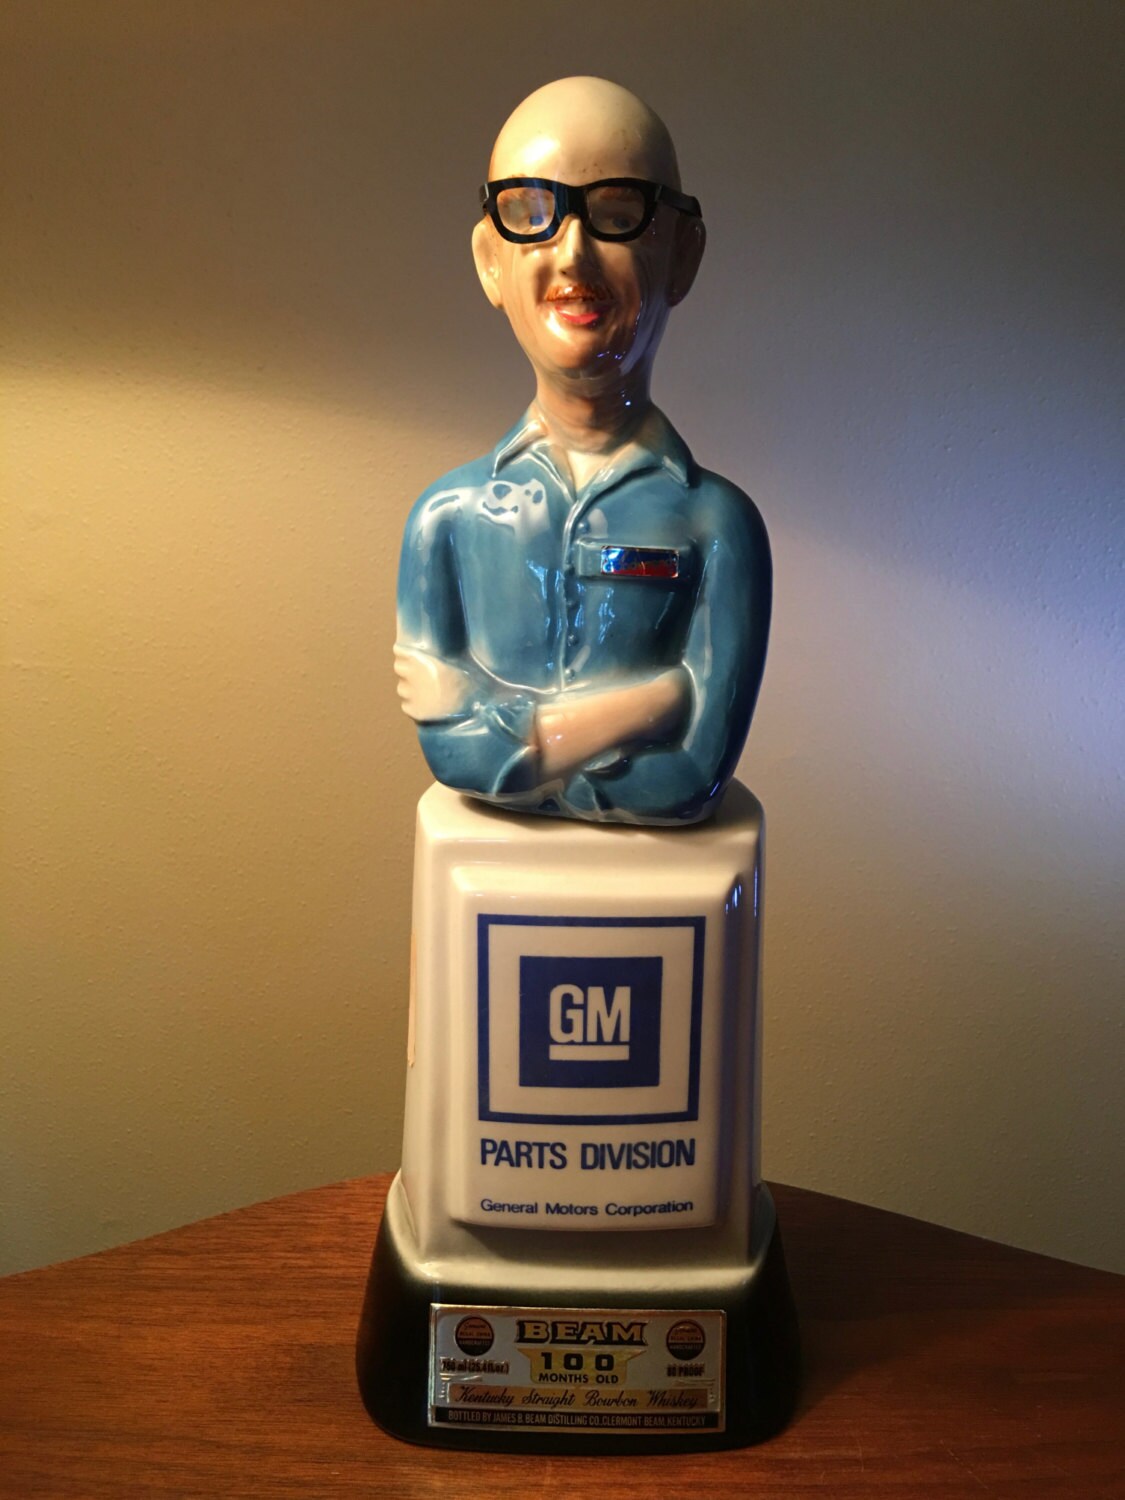 1978 Mr. Goodwrench GM Parts Division liquor decanter by Jim1125 x 1500